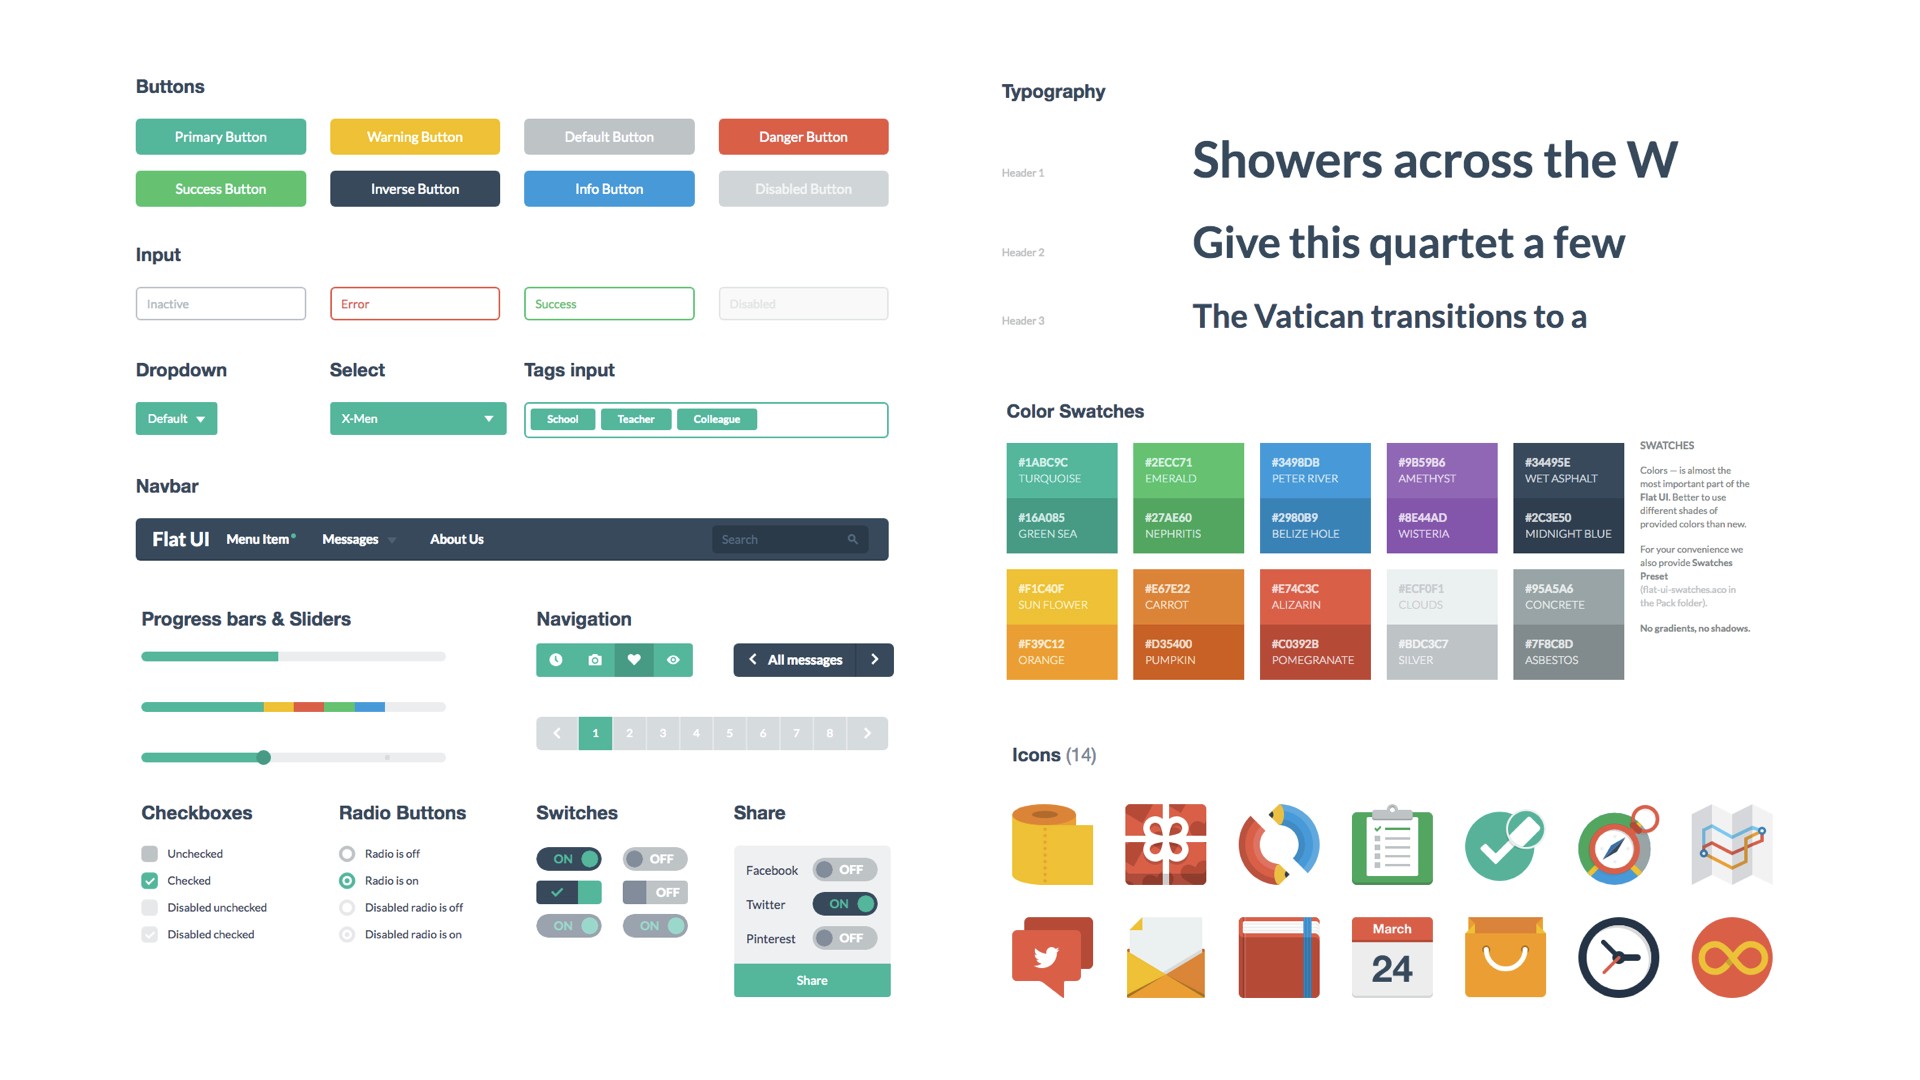 Set of visual components for an unspecified design systems, including buttons, typography, color swatches, icons...